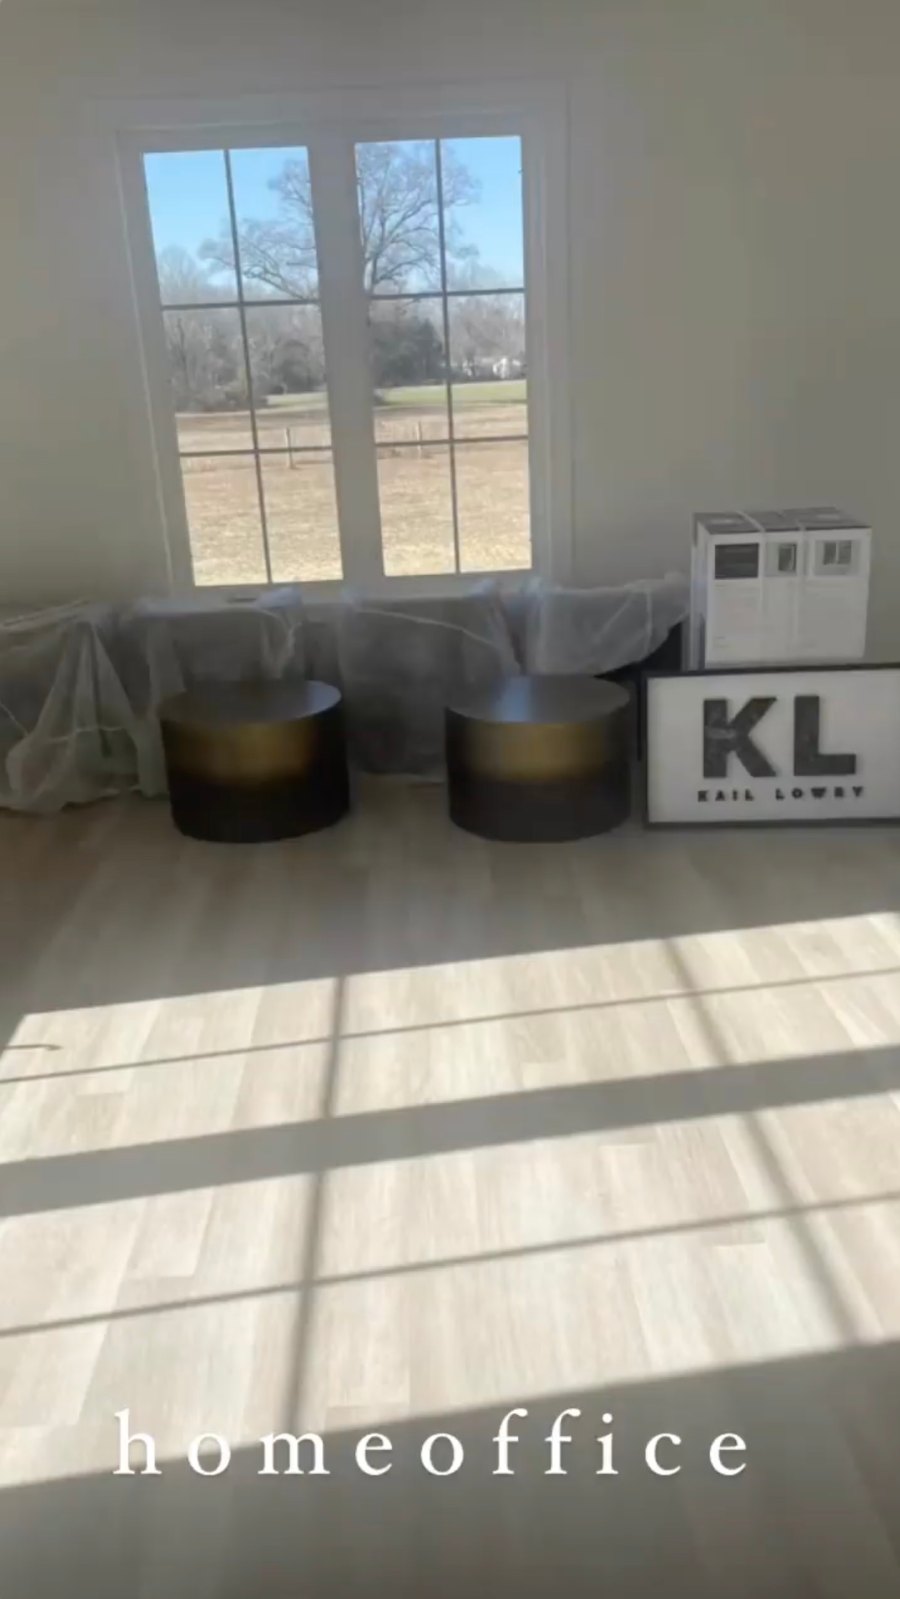 Home Office Inside Kailyn Lowry's Home Build for 4 Kids